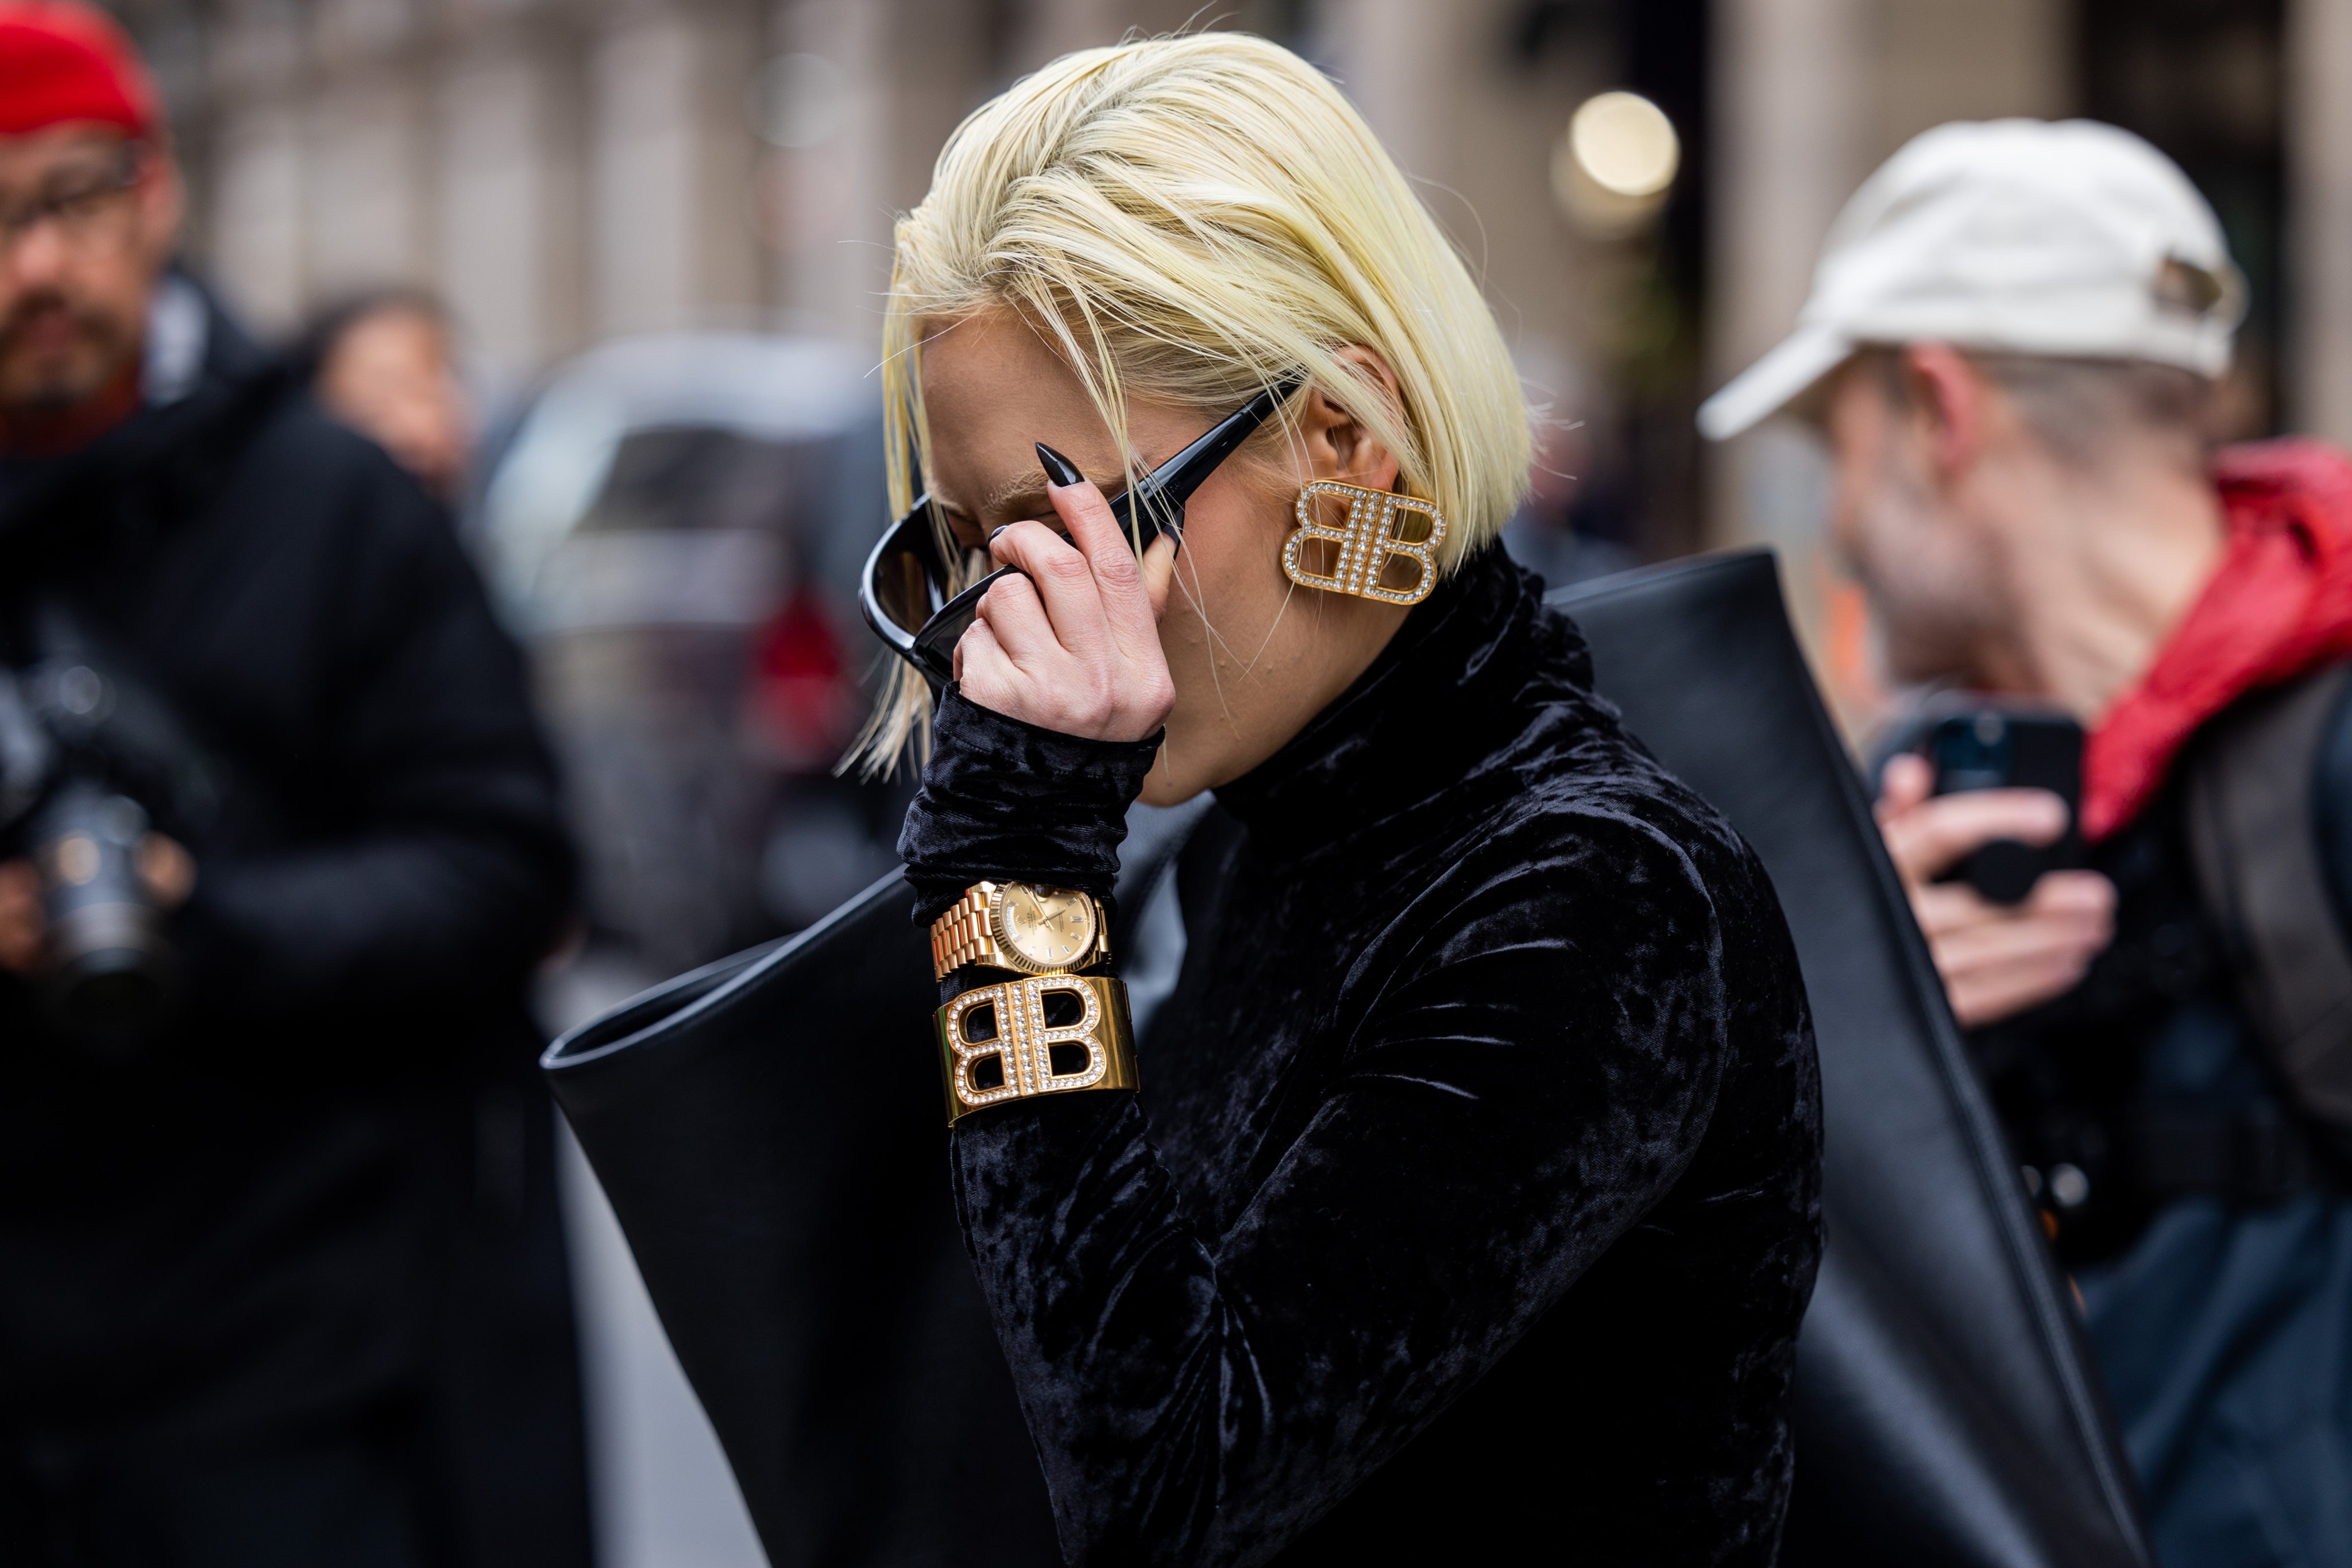 A guest wears earrings and a bracelet outside Balenciaga’s Paris Fashion Week womenswear autumn/winter show in March 2023, in Paris, France. Photo: Getty Images